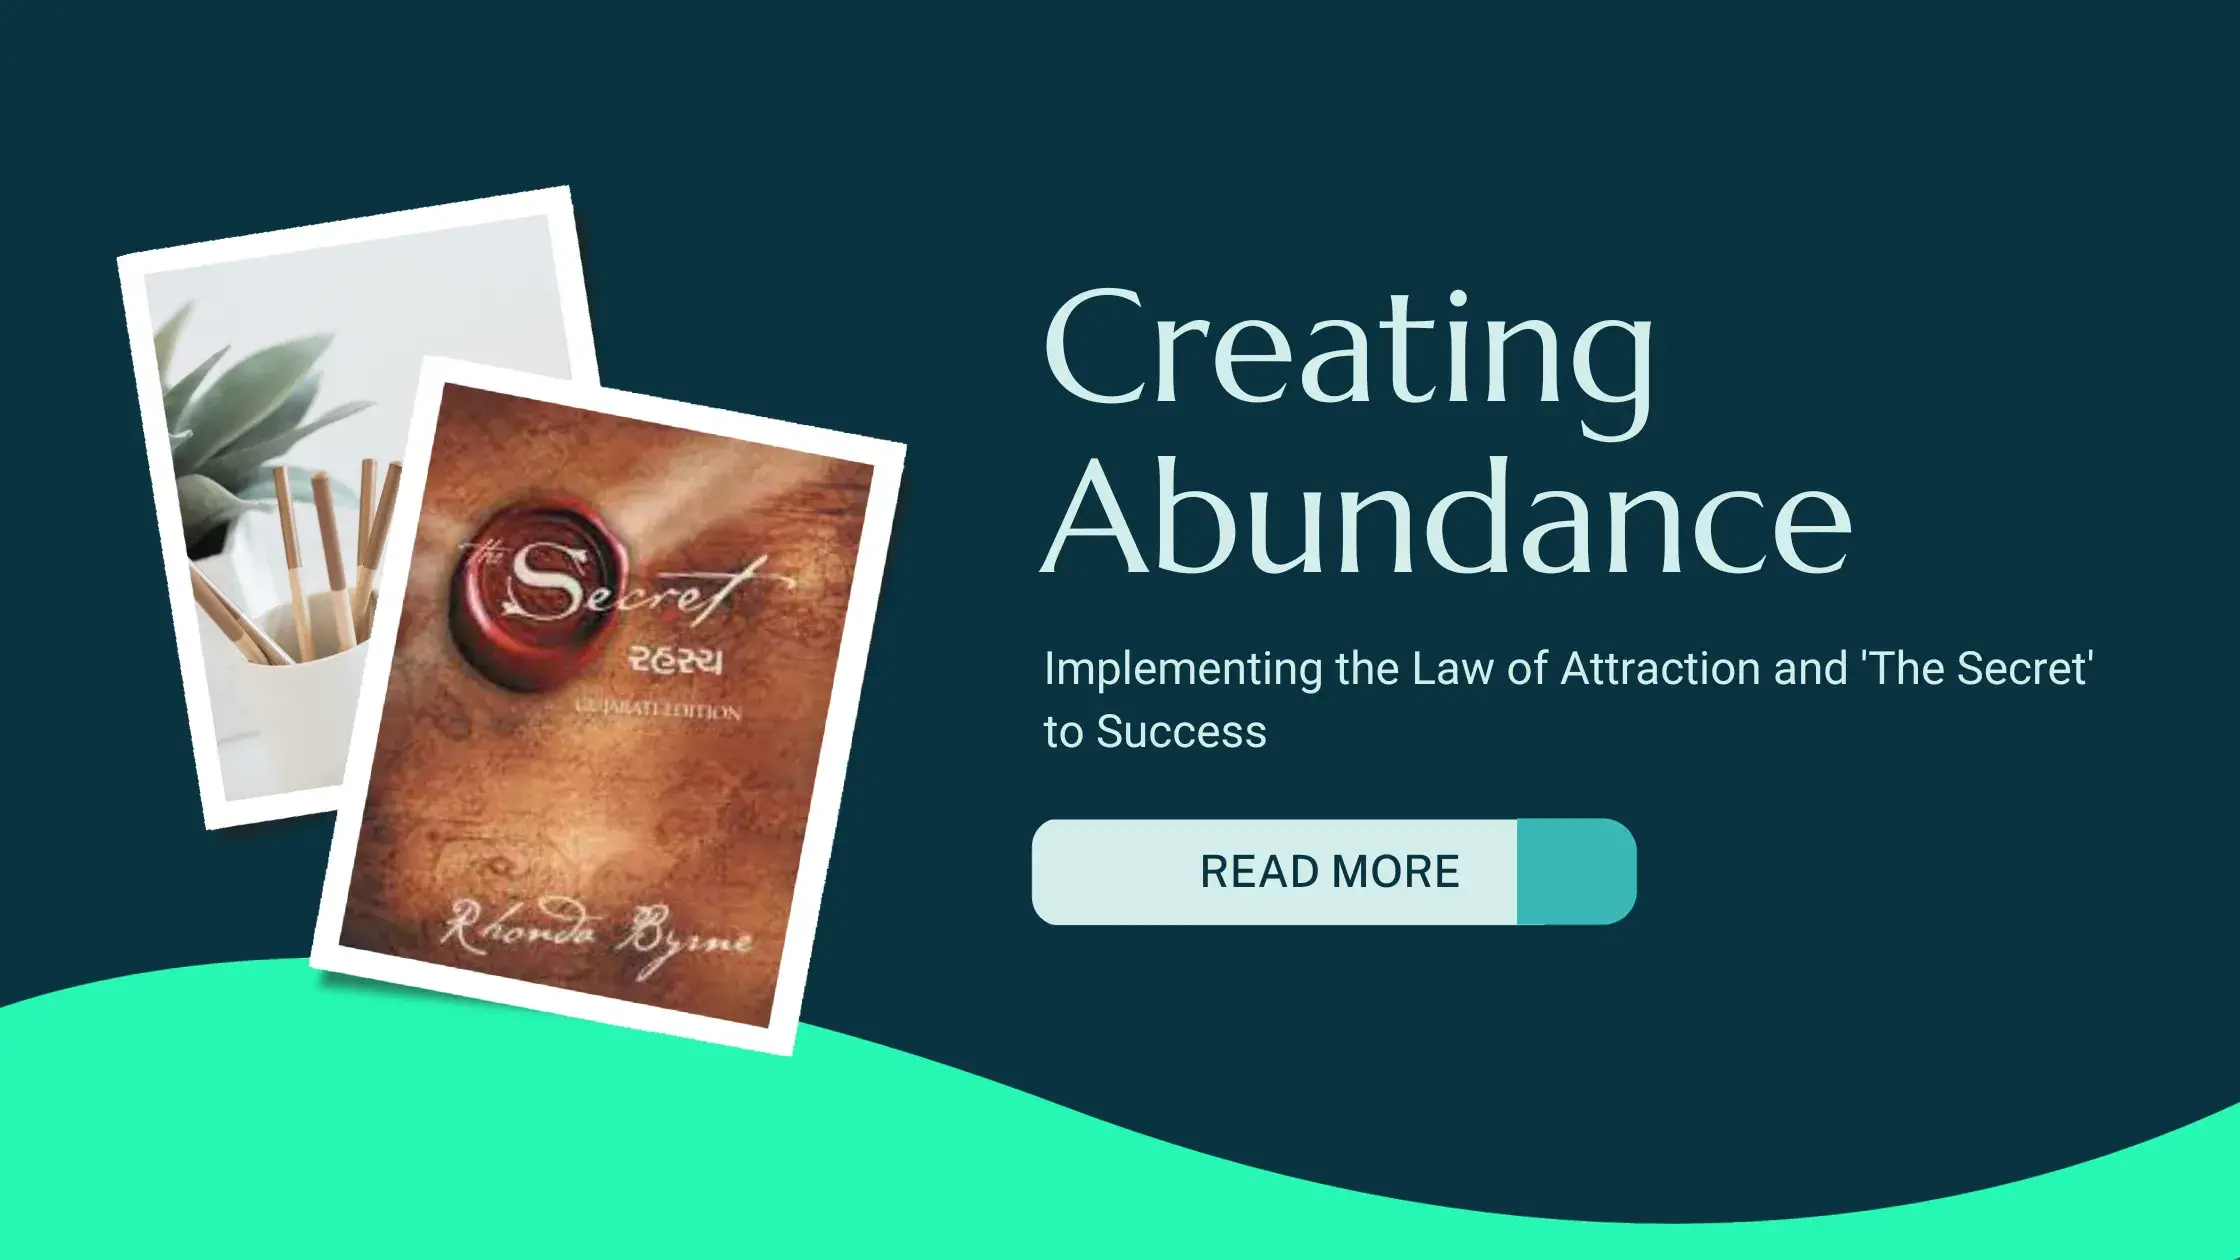 Creating Abundance: Implementing the Law of Attraction and 'The Secret' to Success